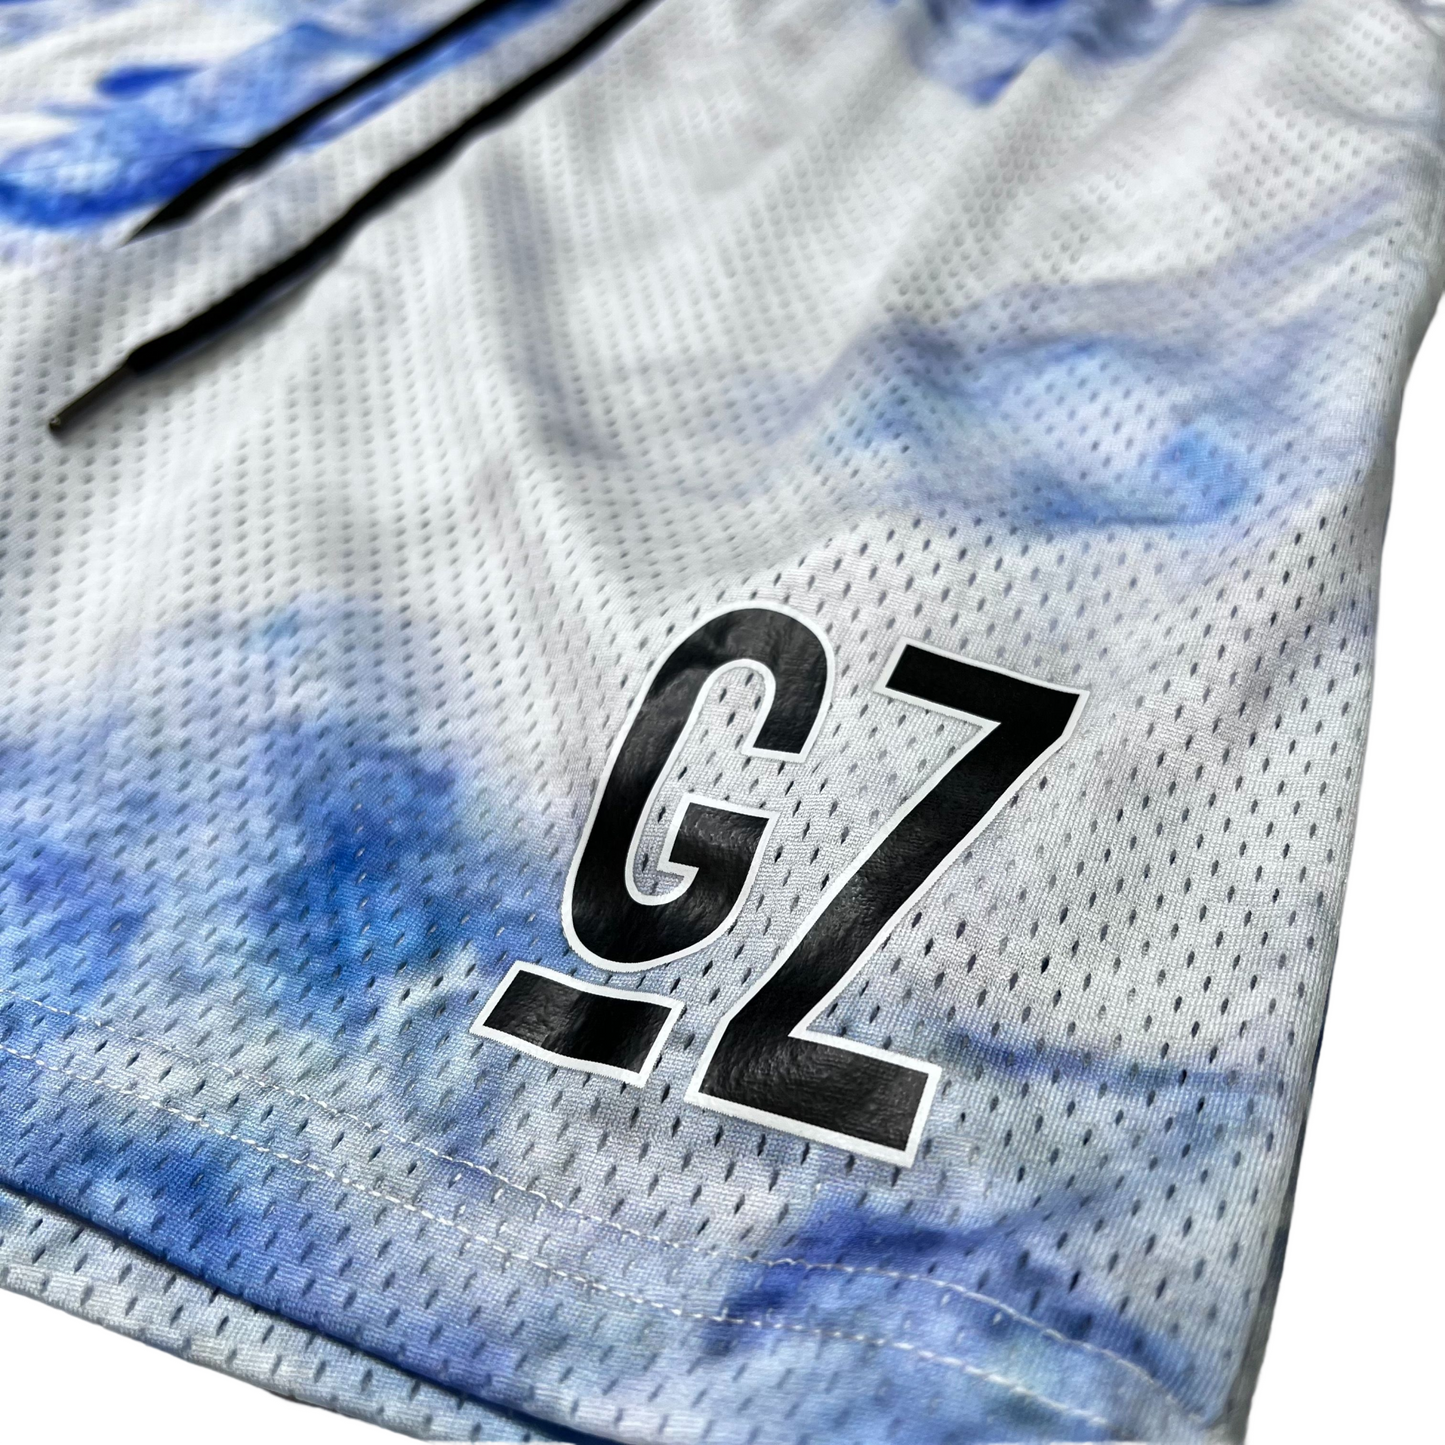 GZ Miami South Shore✥𝔾𝕣𝕠𝕦𝕟𝕕ℤ𝕖𝕣𝕠®✥2023 Southern suit big guy/GZ American casual neutral sports outdoor glass blue and white quarter shorts and ball pants 